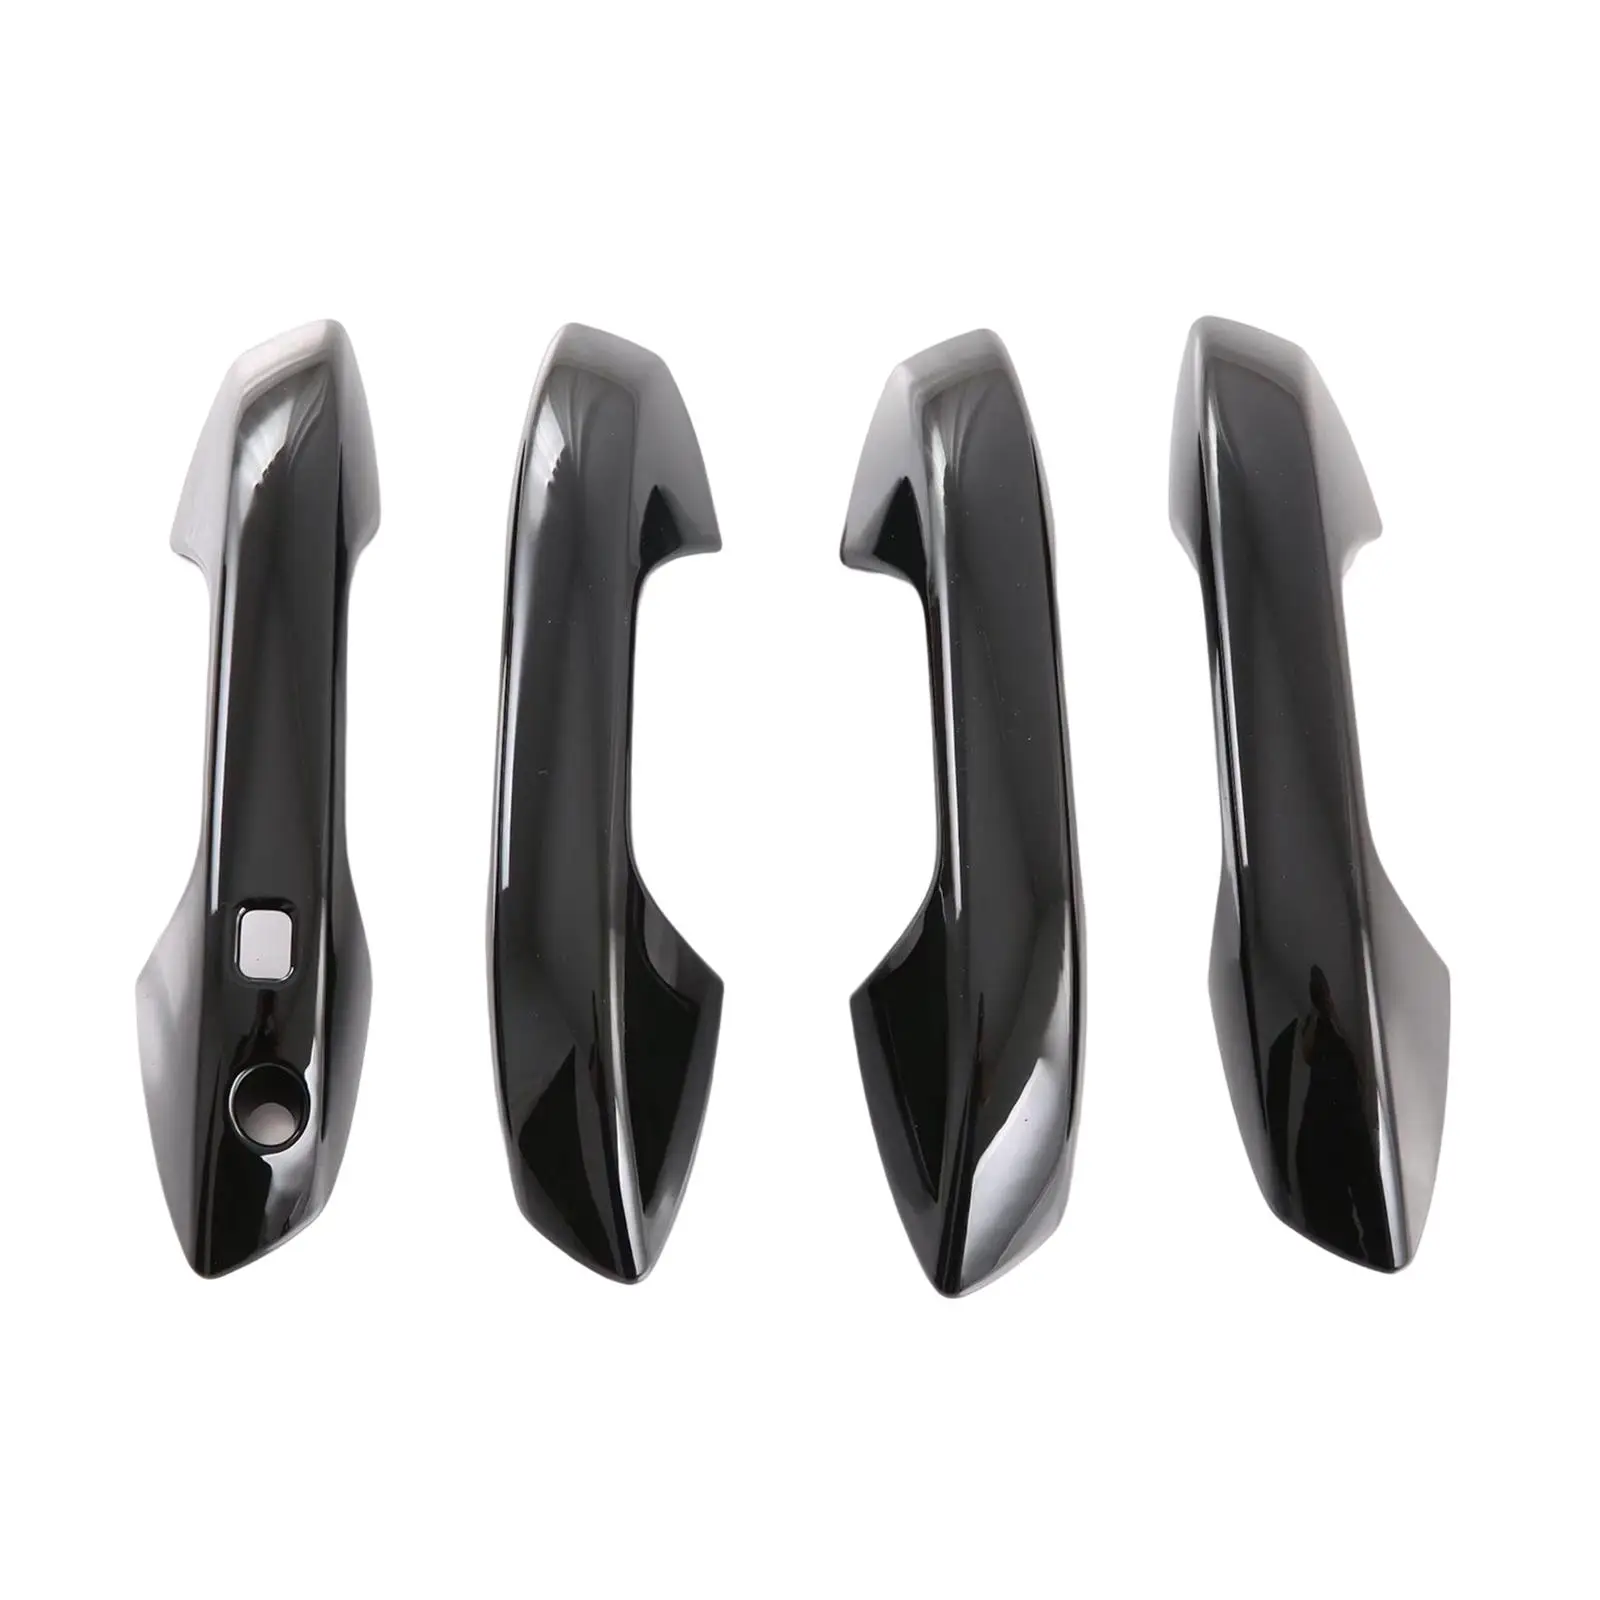 Auto Door Handle Protective Cover Scratch Resistant for Byd Yuan Plus